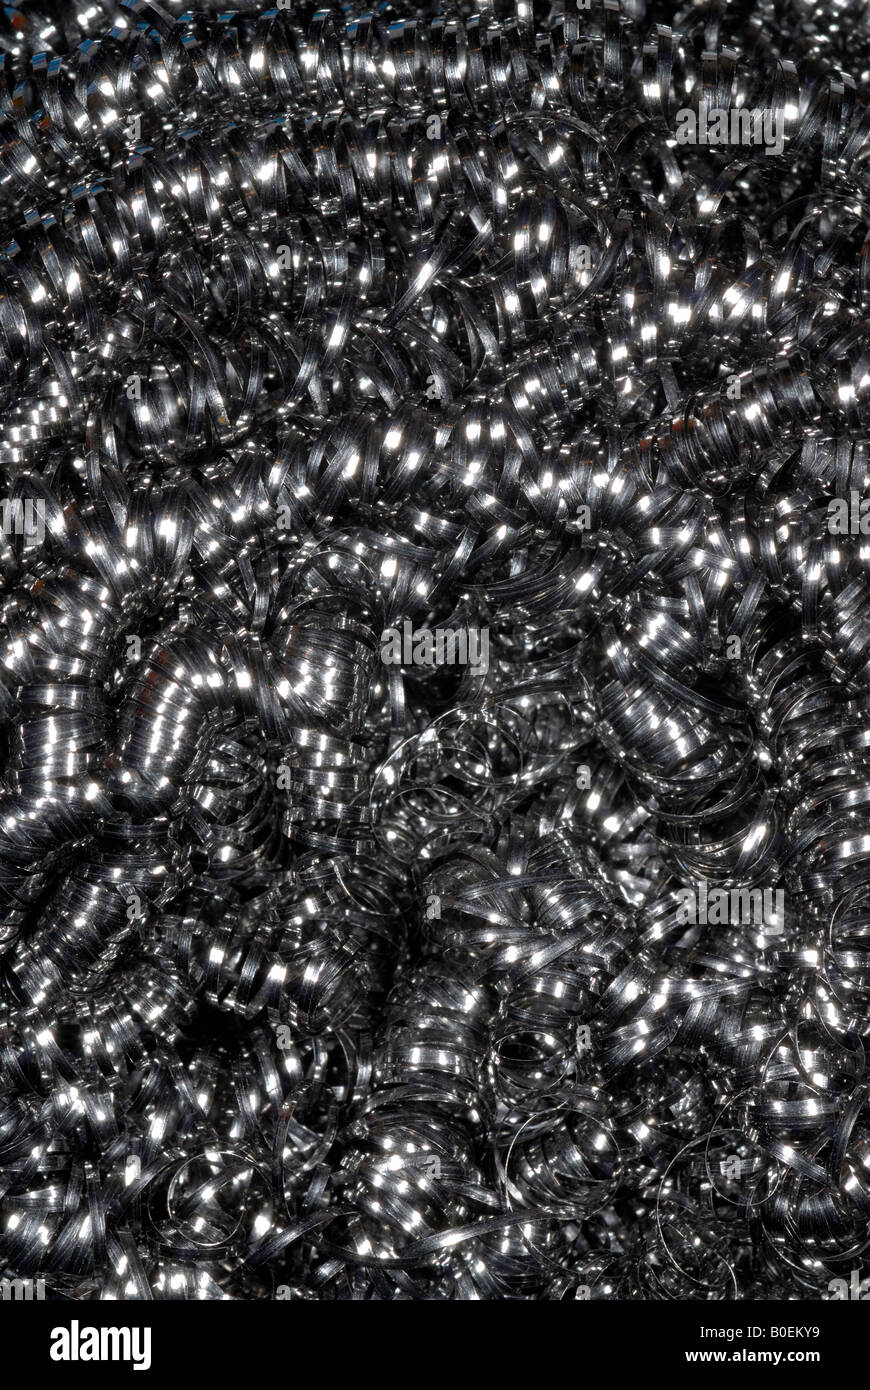 closeup of steel wool used for cleaning pots and pans Stock Photo